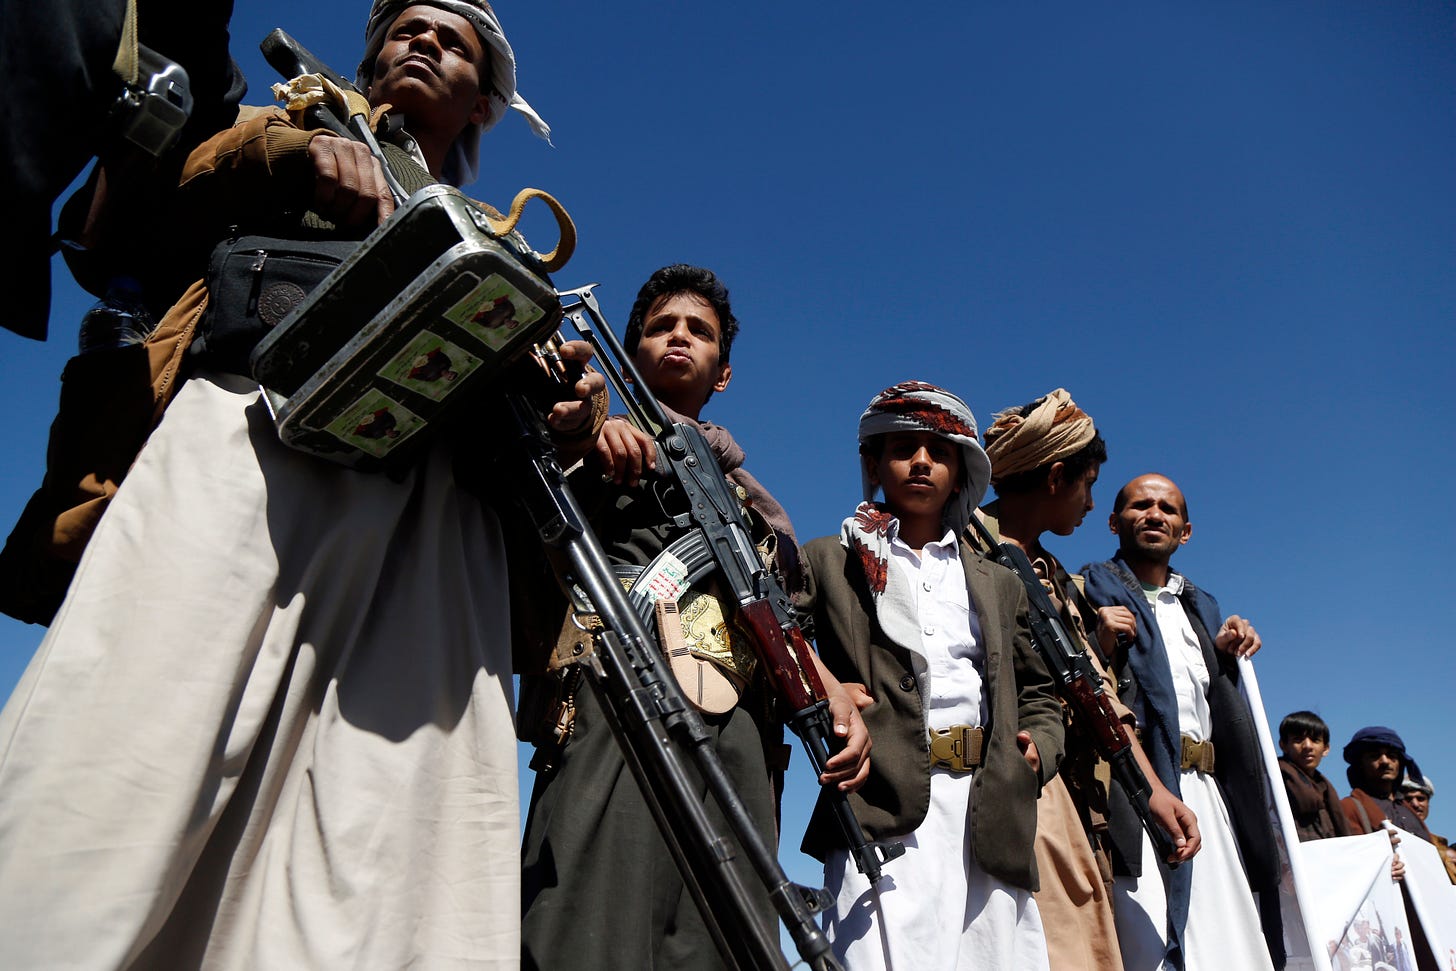 SANA'A, YEMEN - FEBRUARY 04: Yemen's Houthi supporters take part in a gathering to donate for fighters who fight against forces of the government of Abd Rabbu Mansour Hadi, on February 04, 2021 in Sana'a, Yemen. (Photo by Mohammed Hamoud/Getty Images)